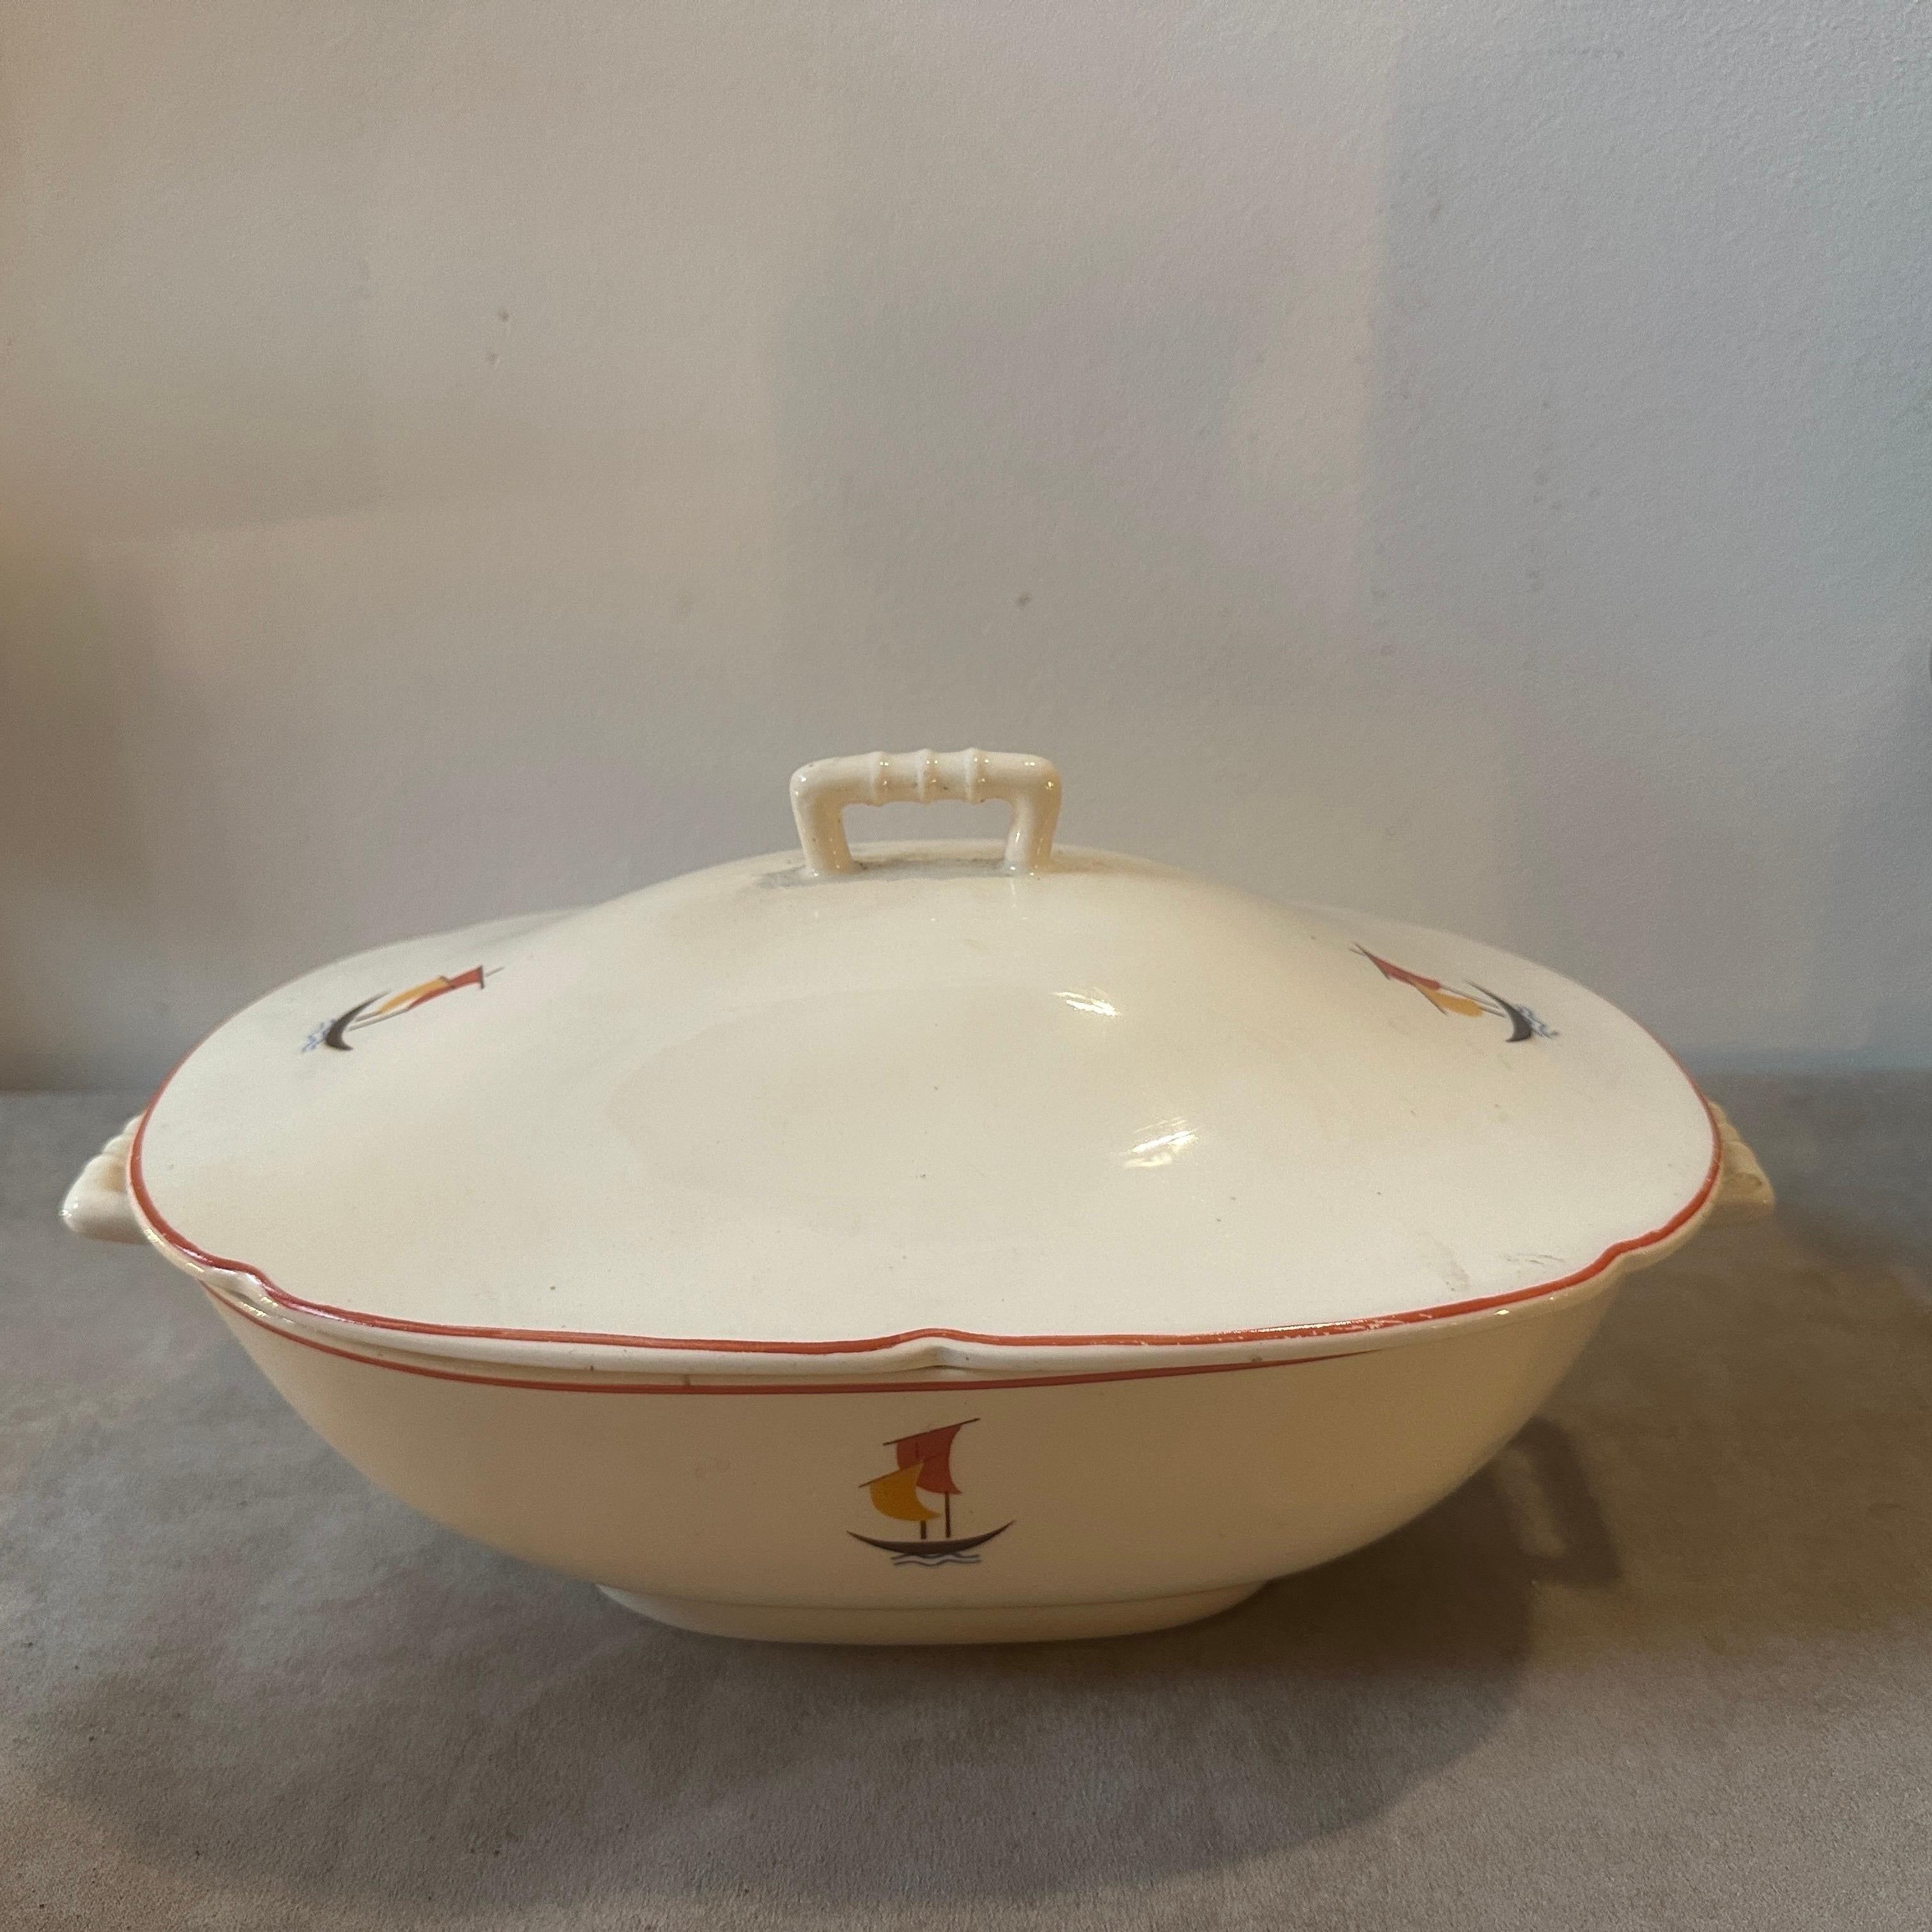 1935s Art Deco Ceramic Soup Tureen by Gio Ponti for S.C. Richard  In Good Condition For Sale In Aci Castello, IT